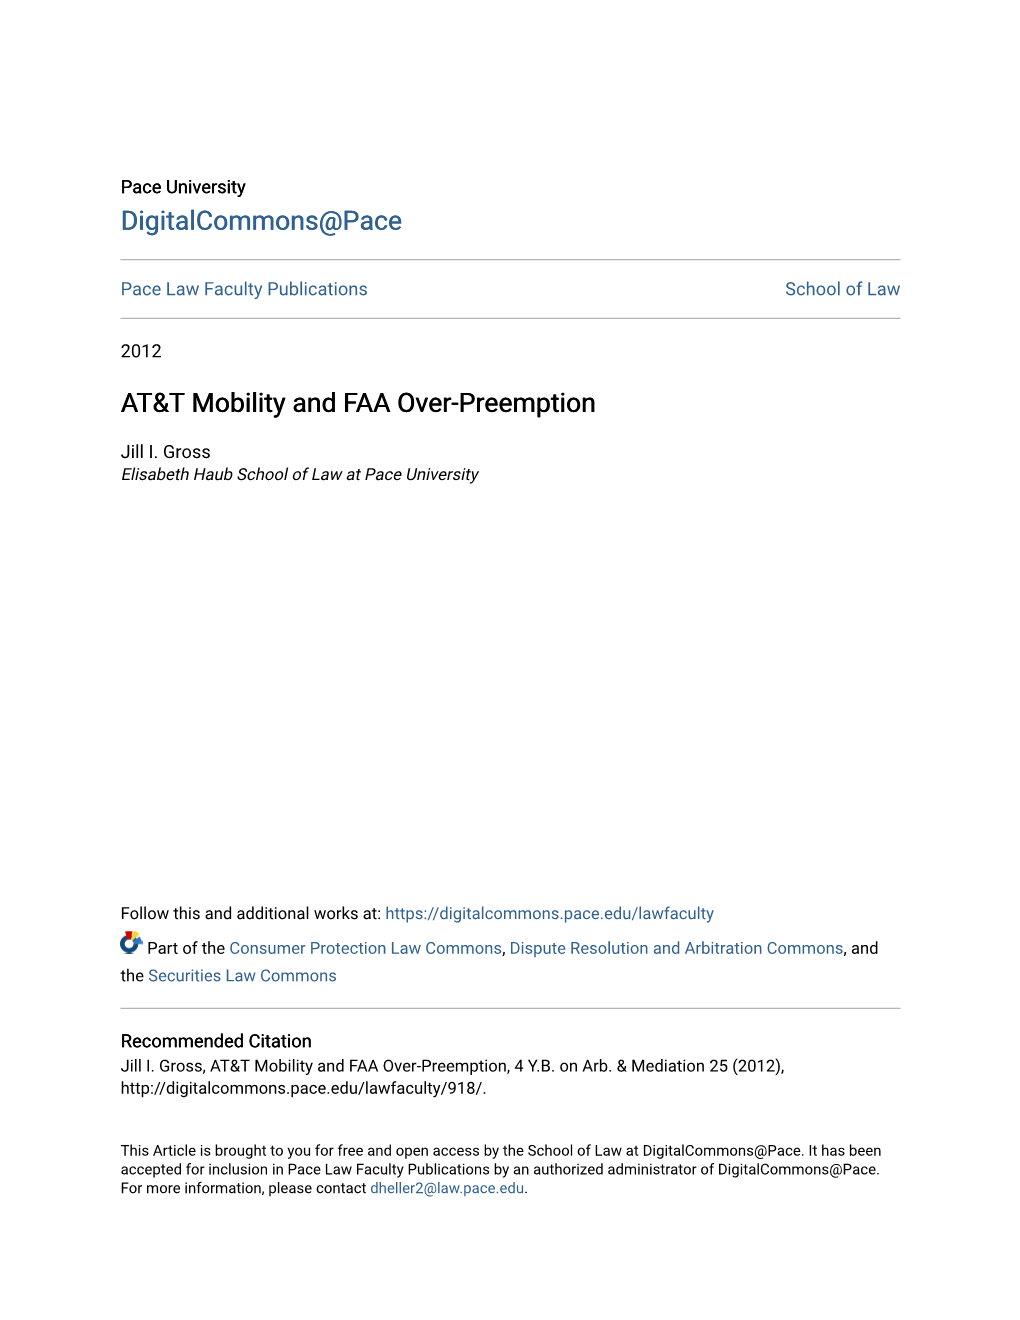 AT&T Mobility and FAA Over-Preemption